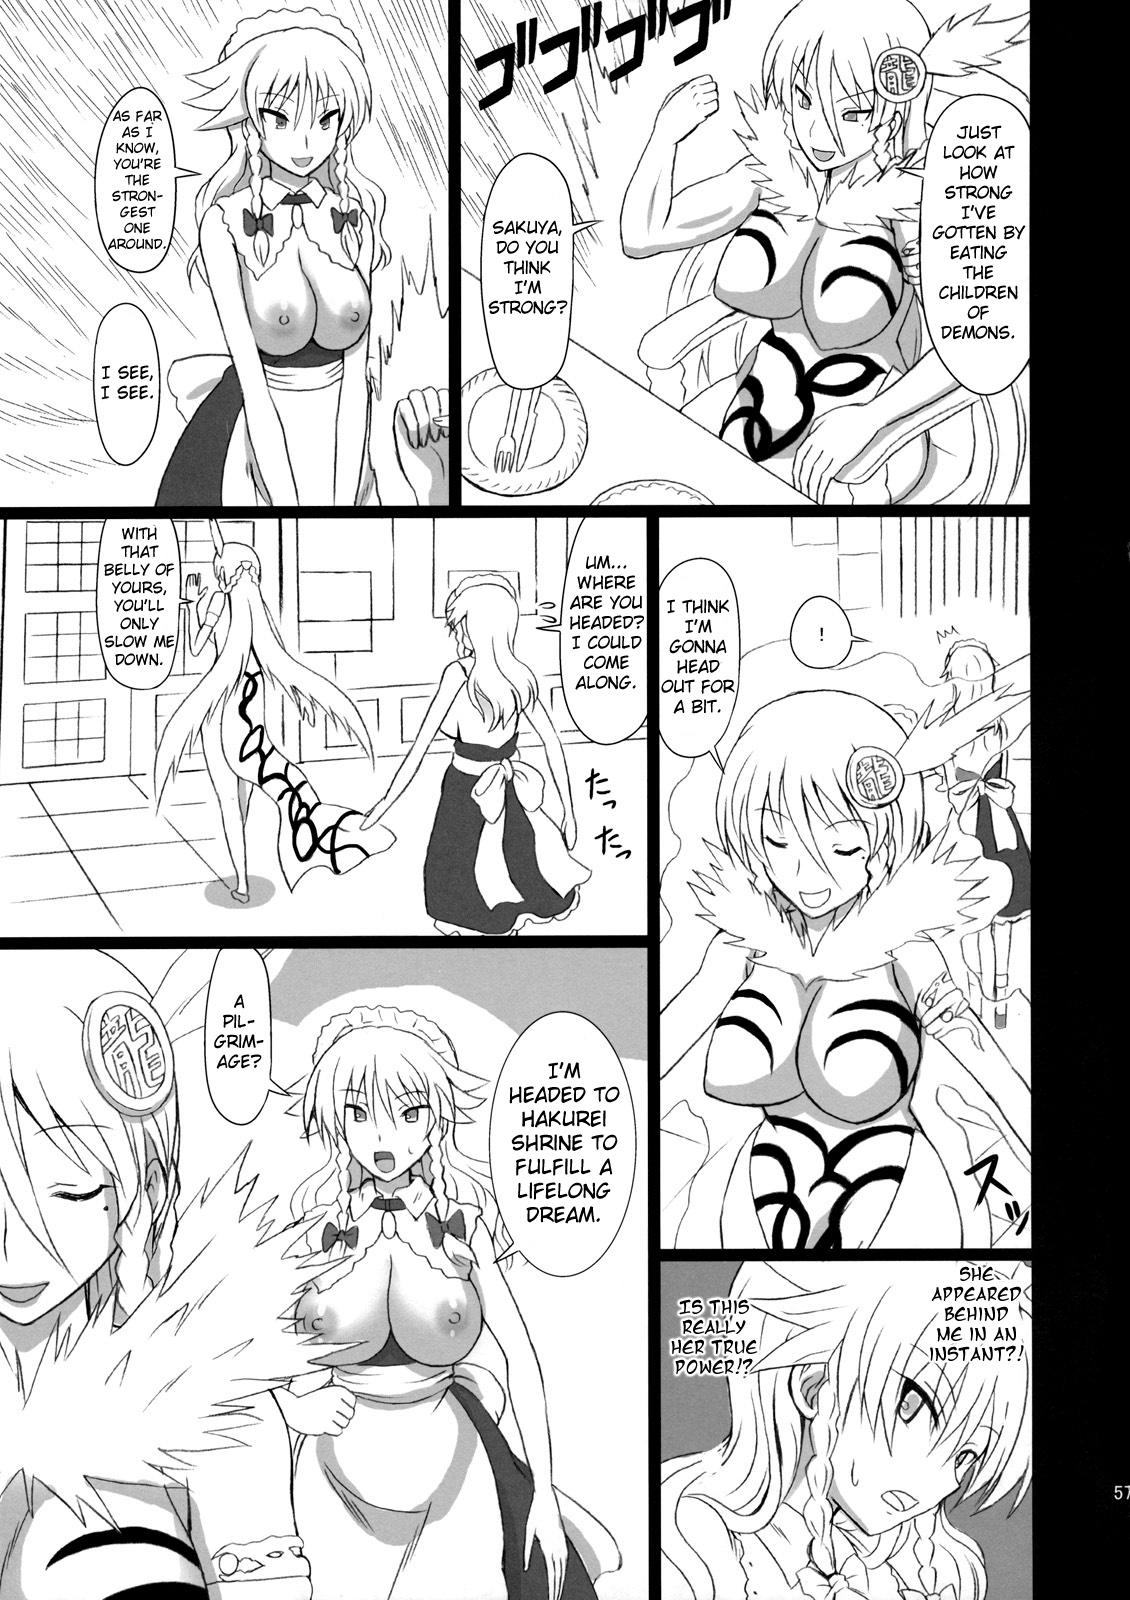 Daddy Extend Party 3 - Touhou project Riding - Page 57